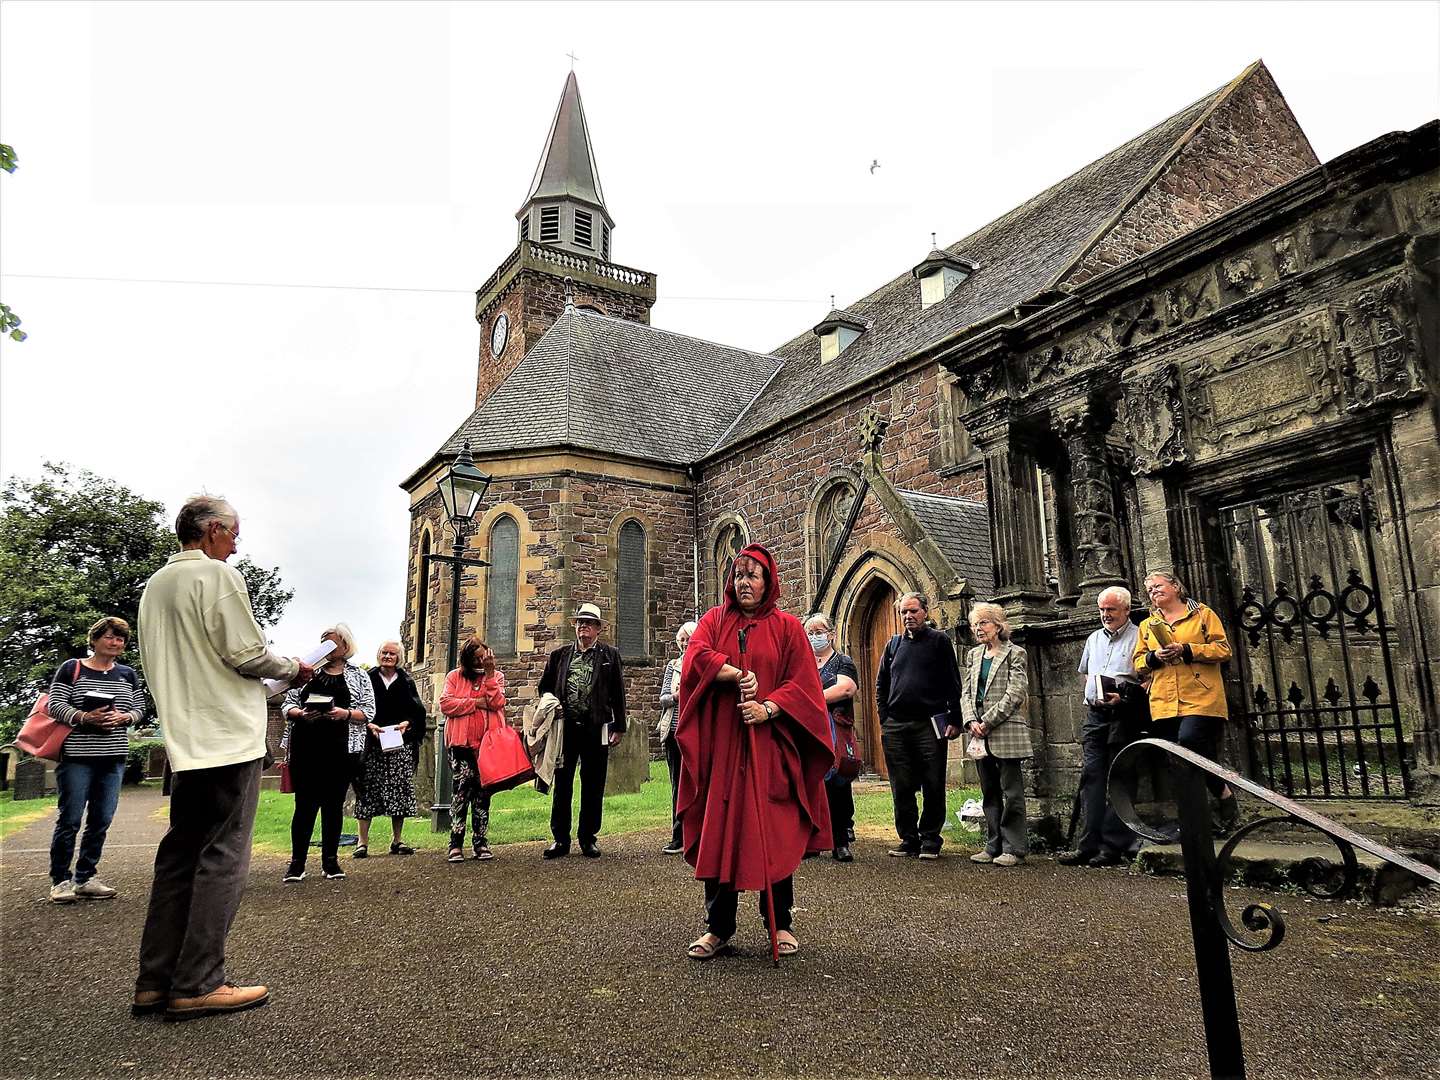 St Columba, in the person of Jim Alexander, confronts the initially aggressive Pictish King Brude, played by Deacon Dot Getliffe.